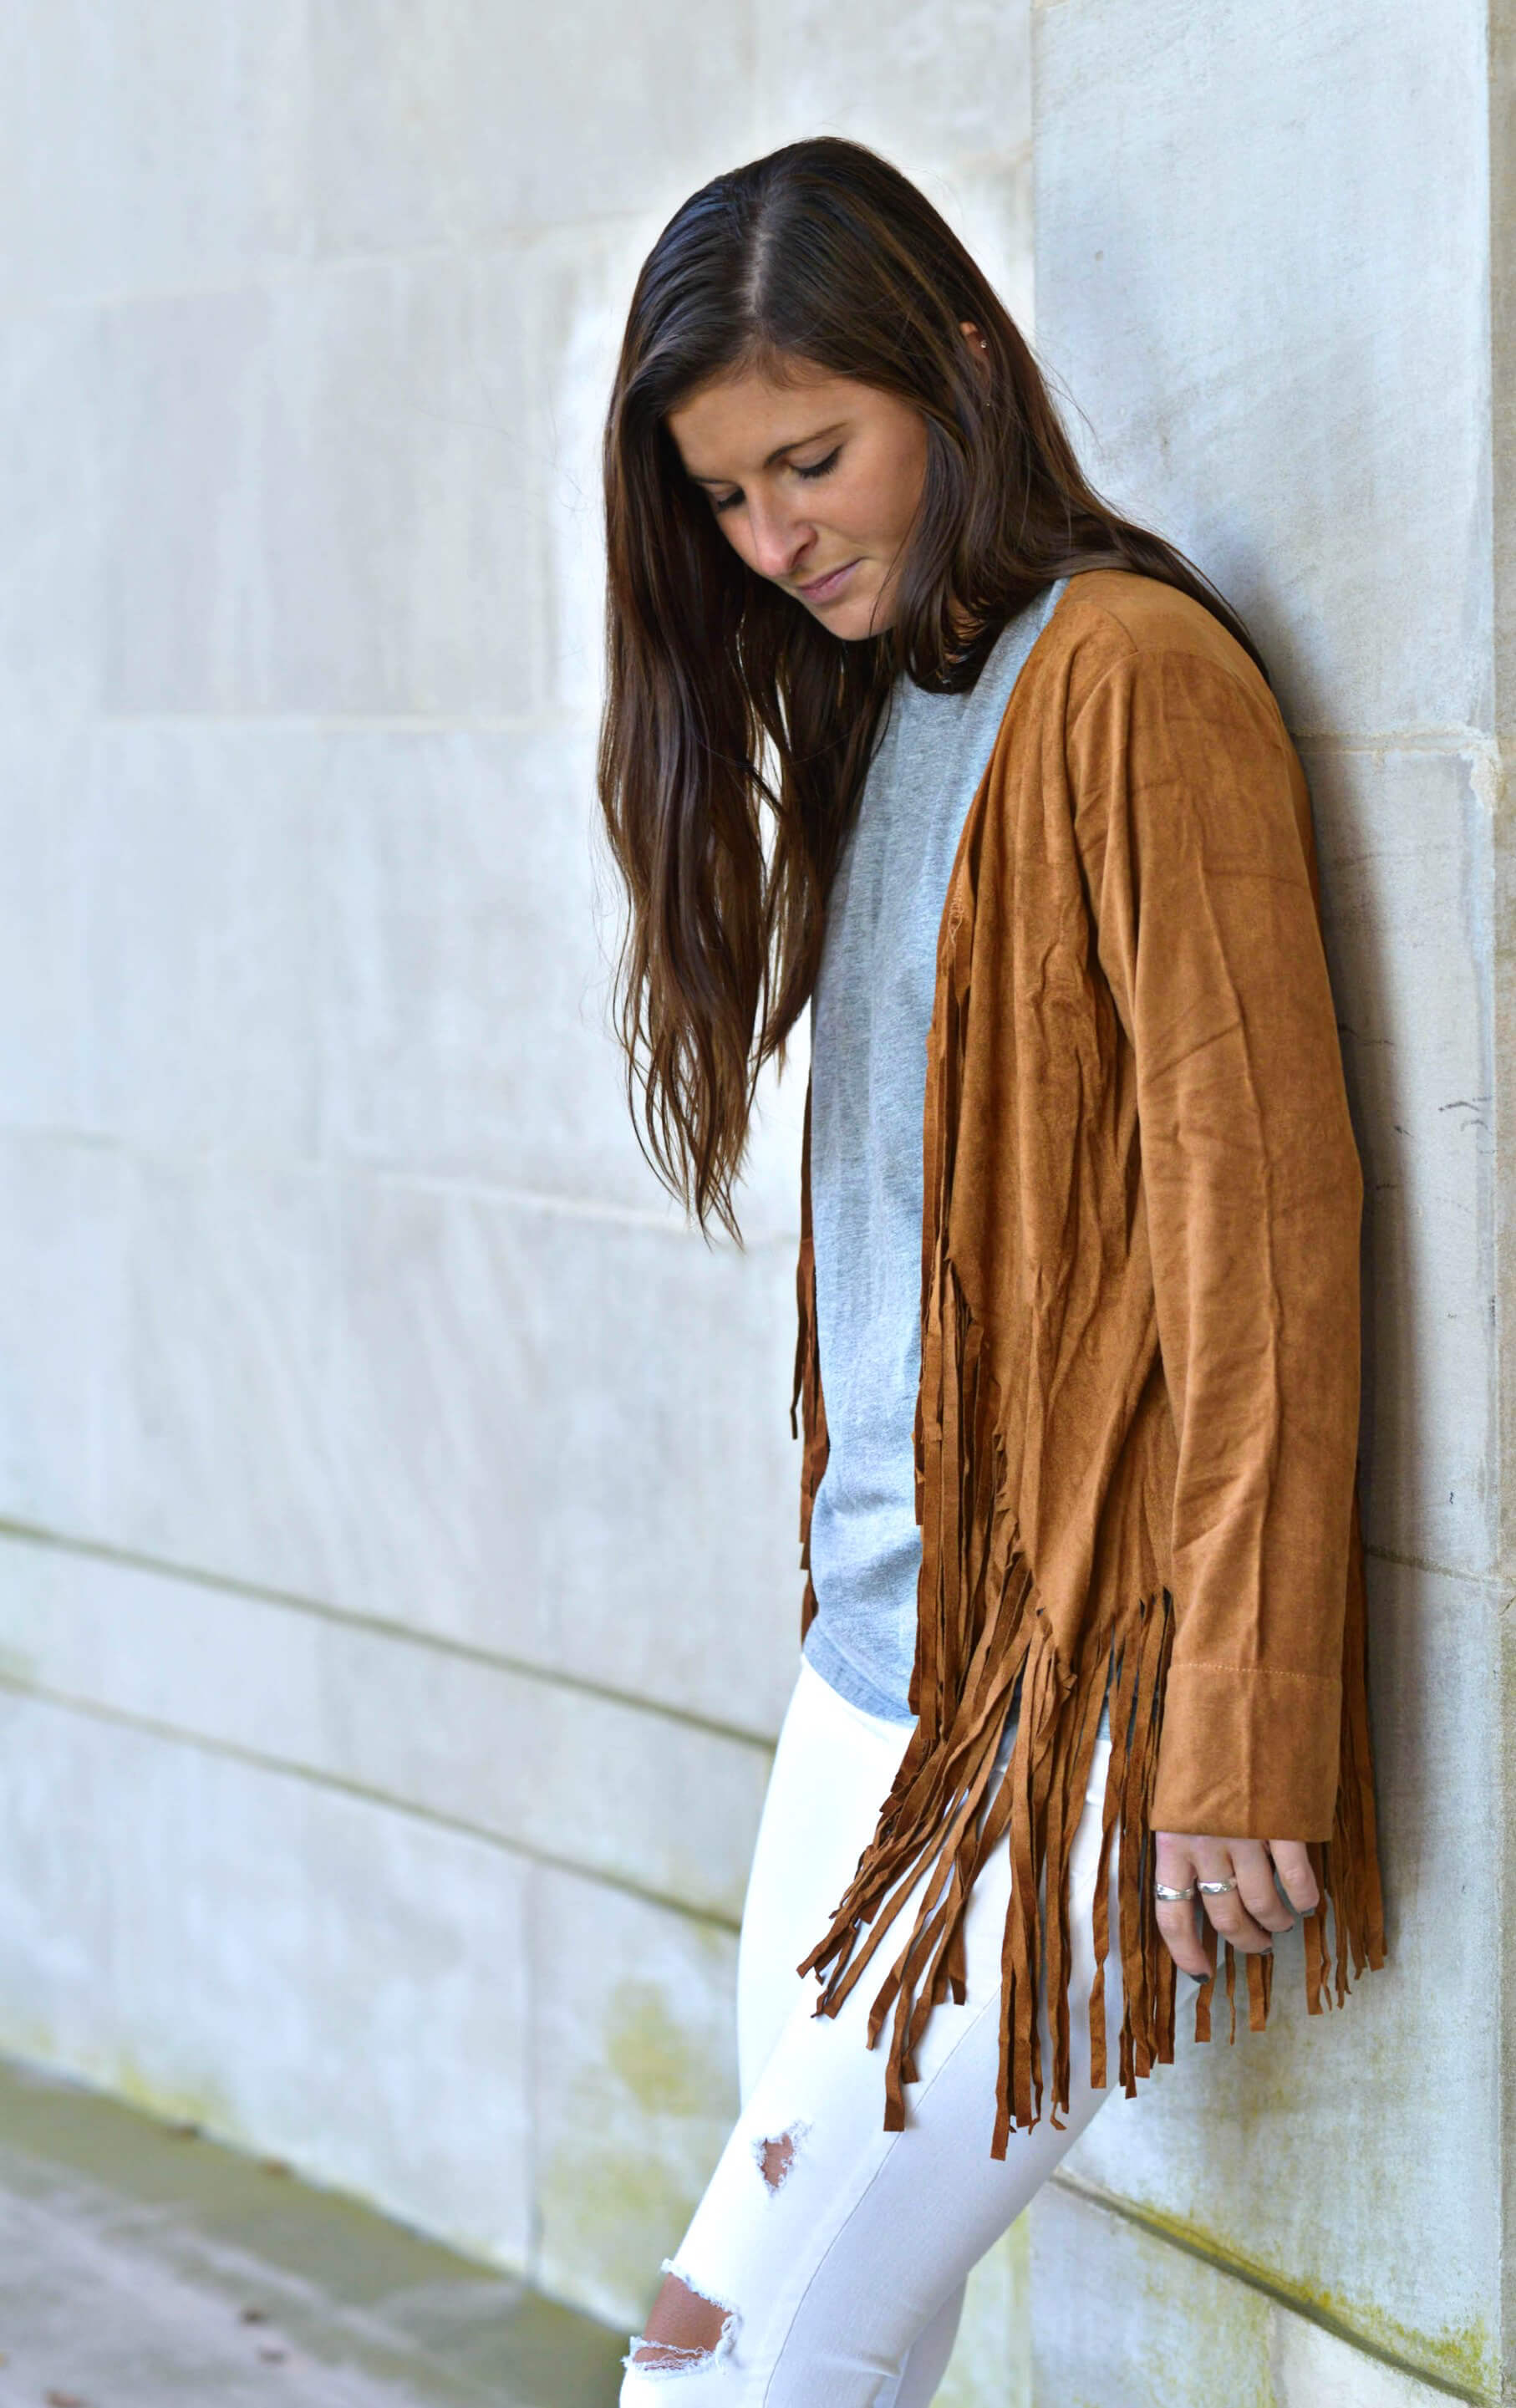 To Be Bright by Tilden Brighton - fall fringe outfit